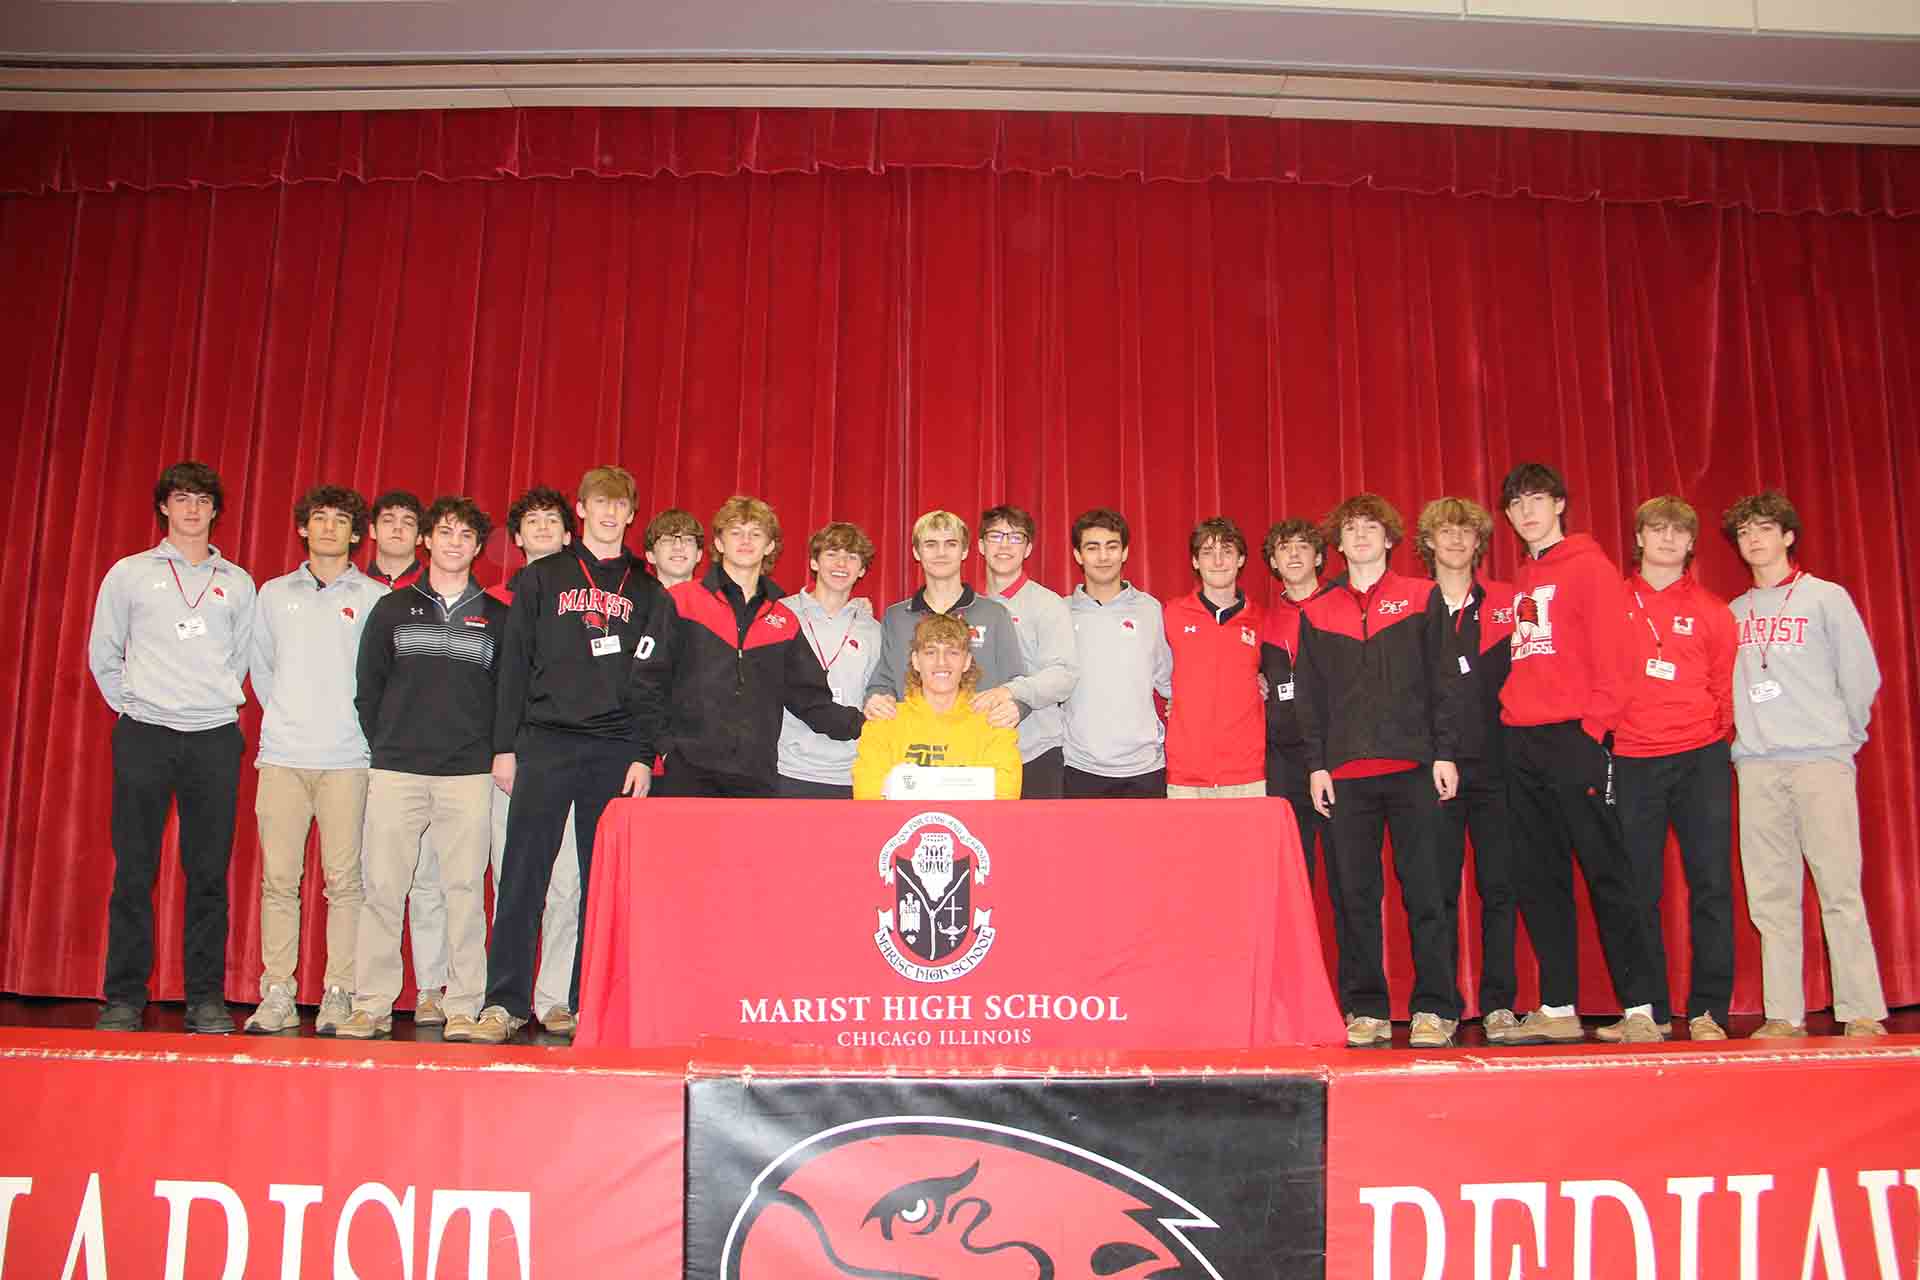 marist-students-with-student-signing-to-college-for-group-photo